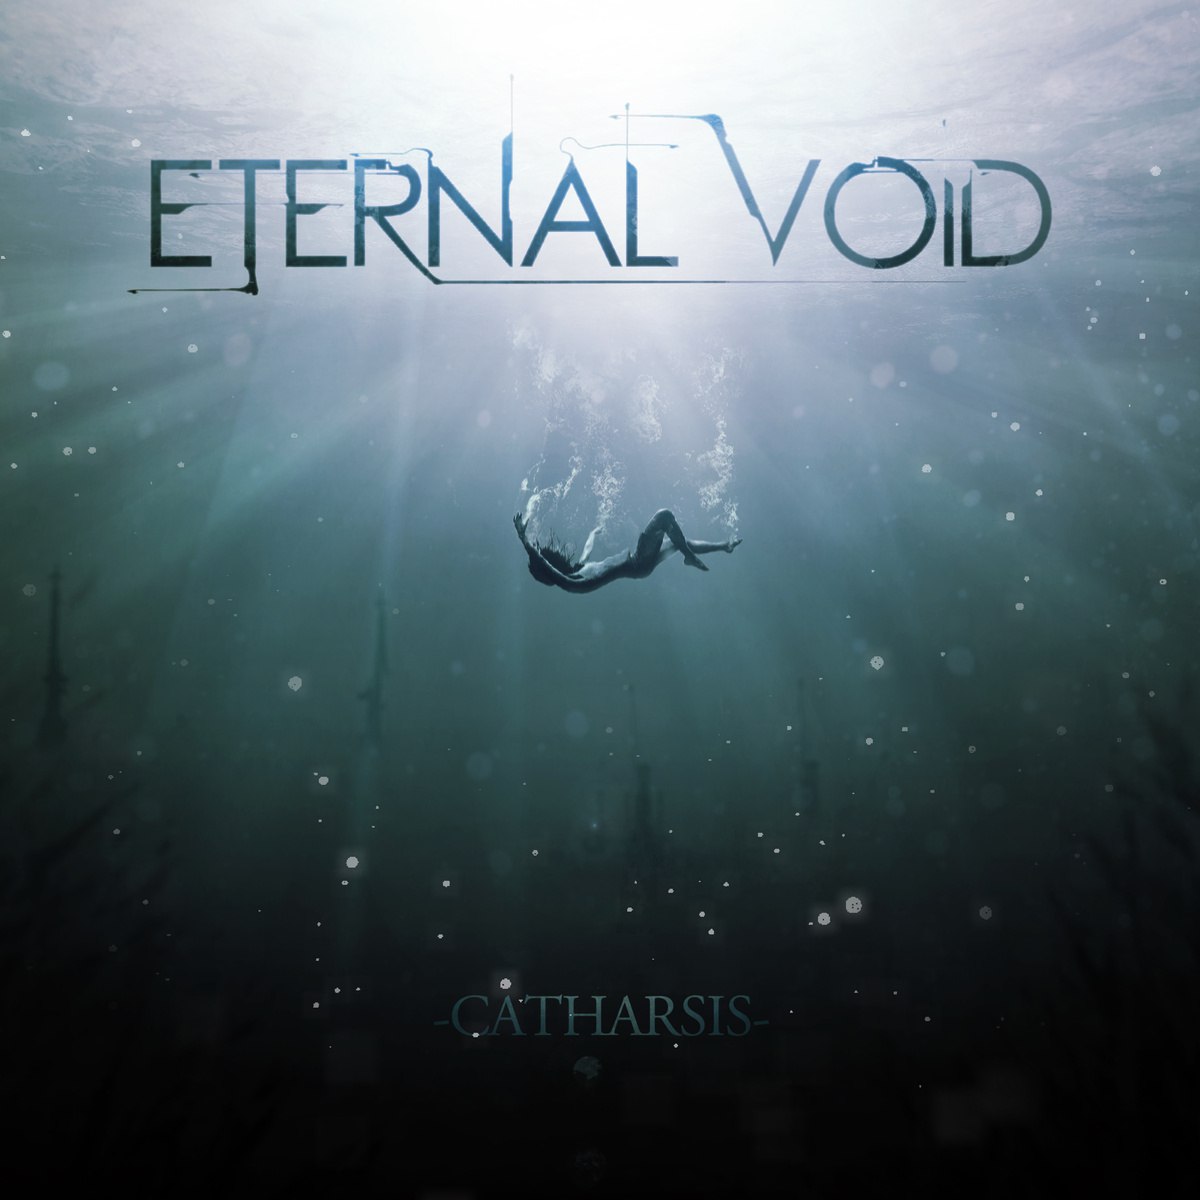 Eternal Void - Catharsis (2014)